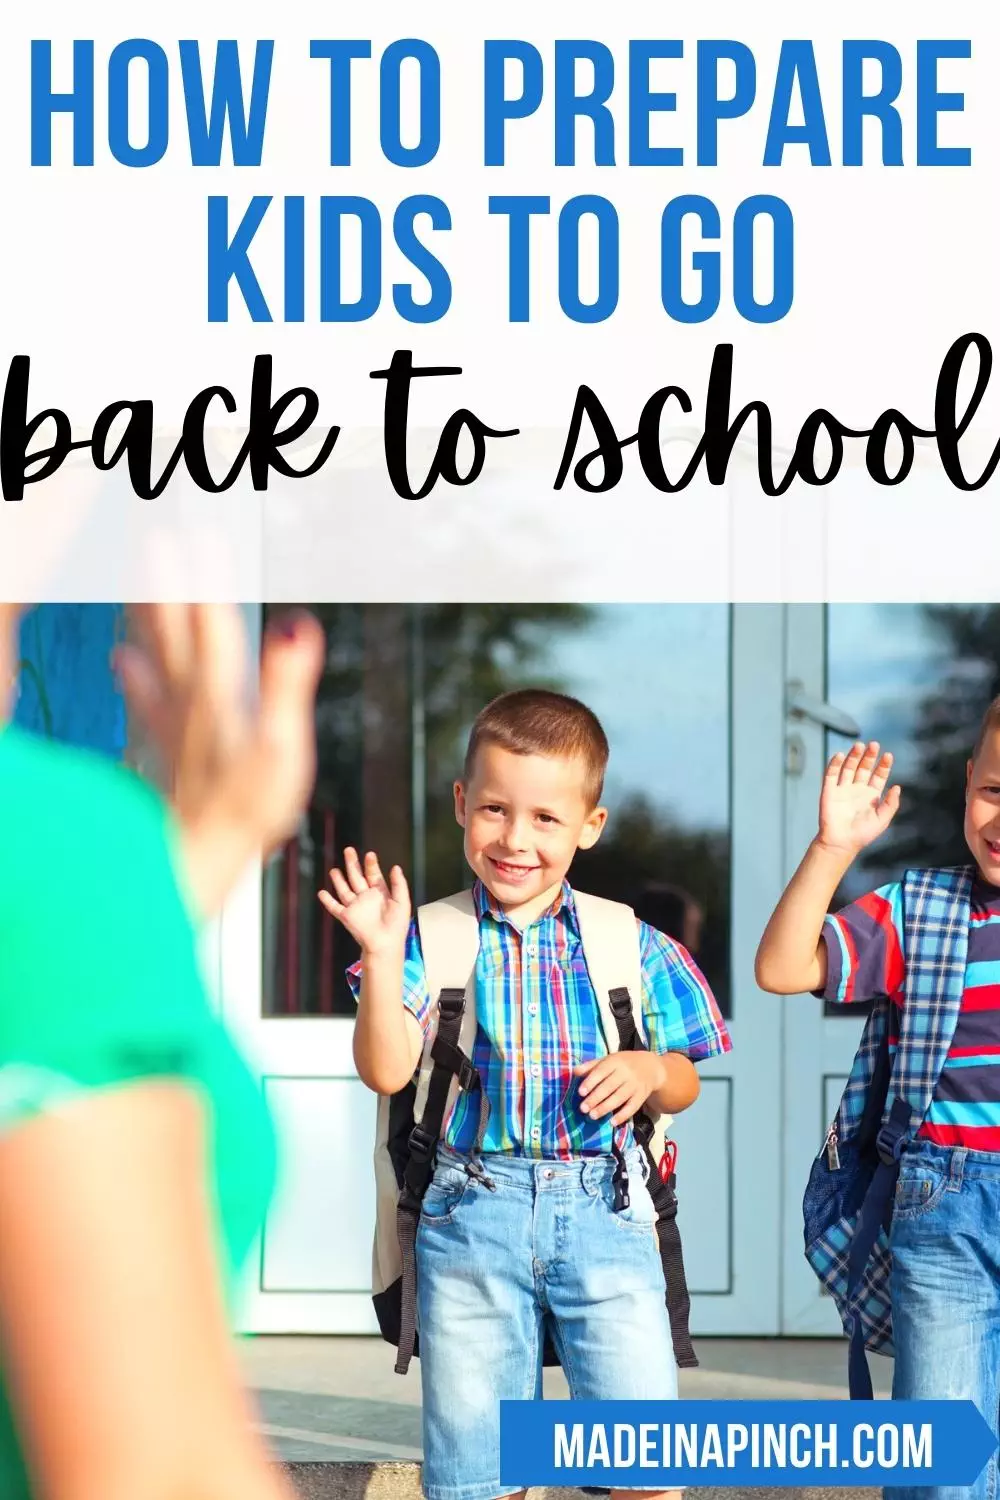 back-to-school preparation tips and tricks pin image